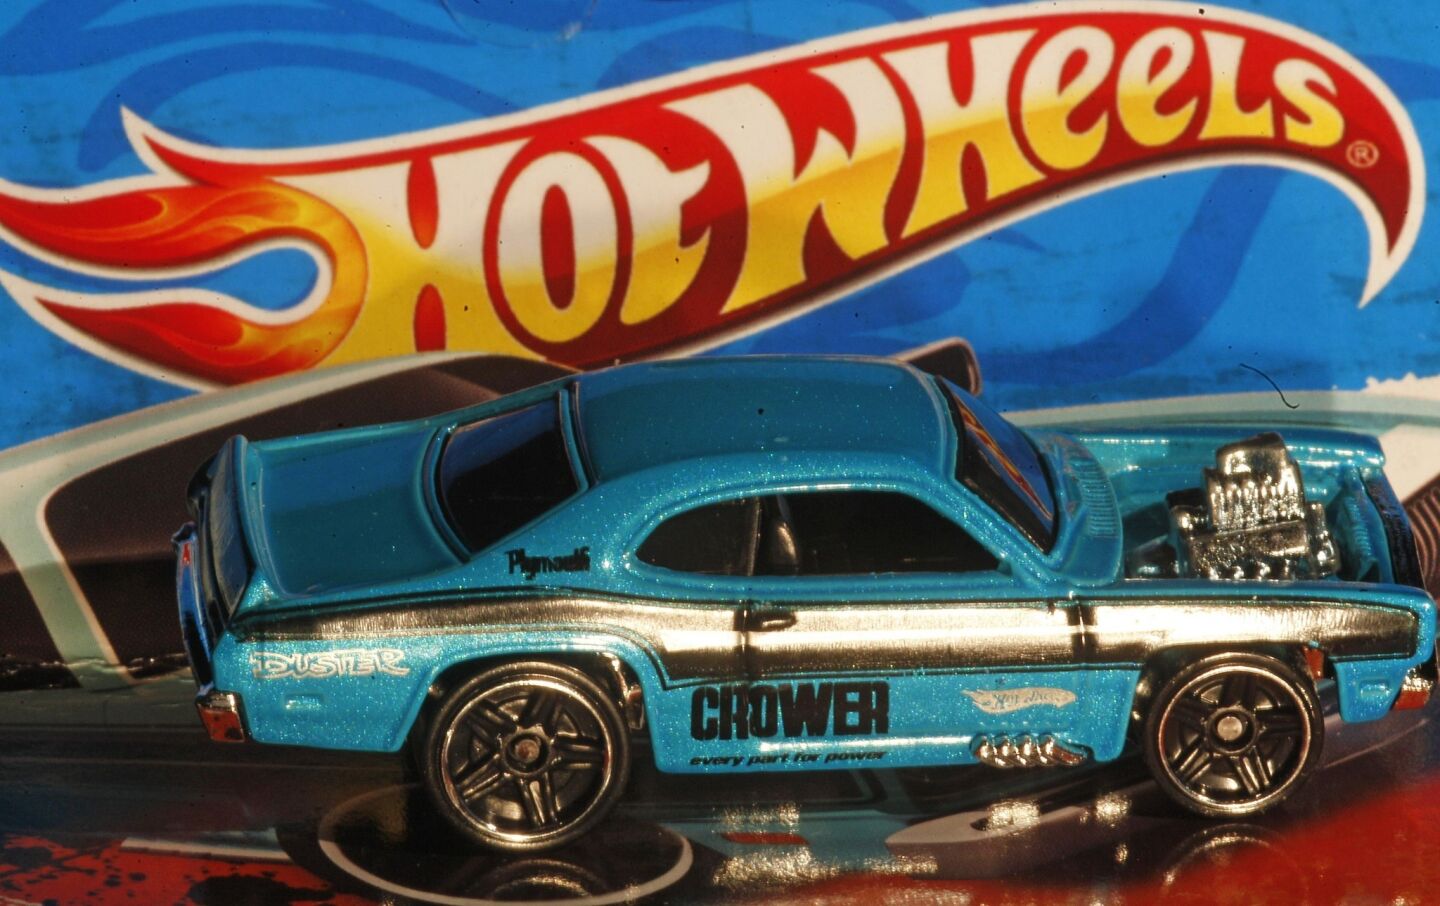 4. Hot Wheels. Worldwide gross sales for the brand were down 2% in the third quarter, according to Mattel.